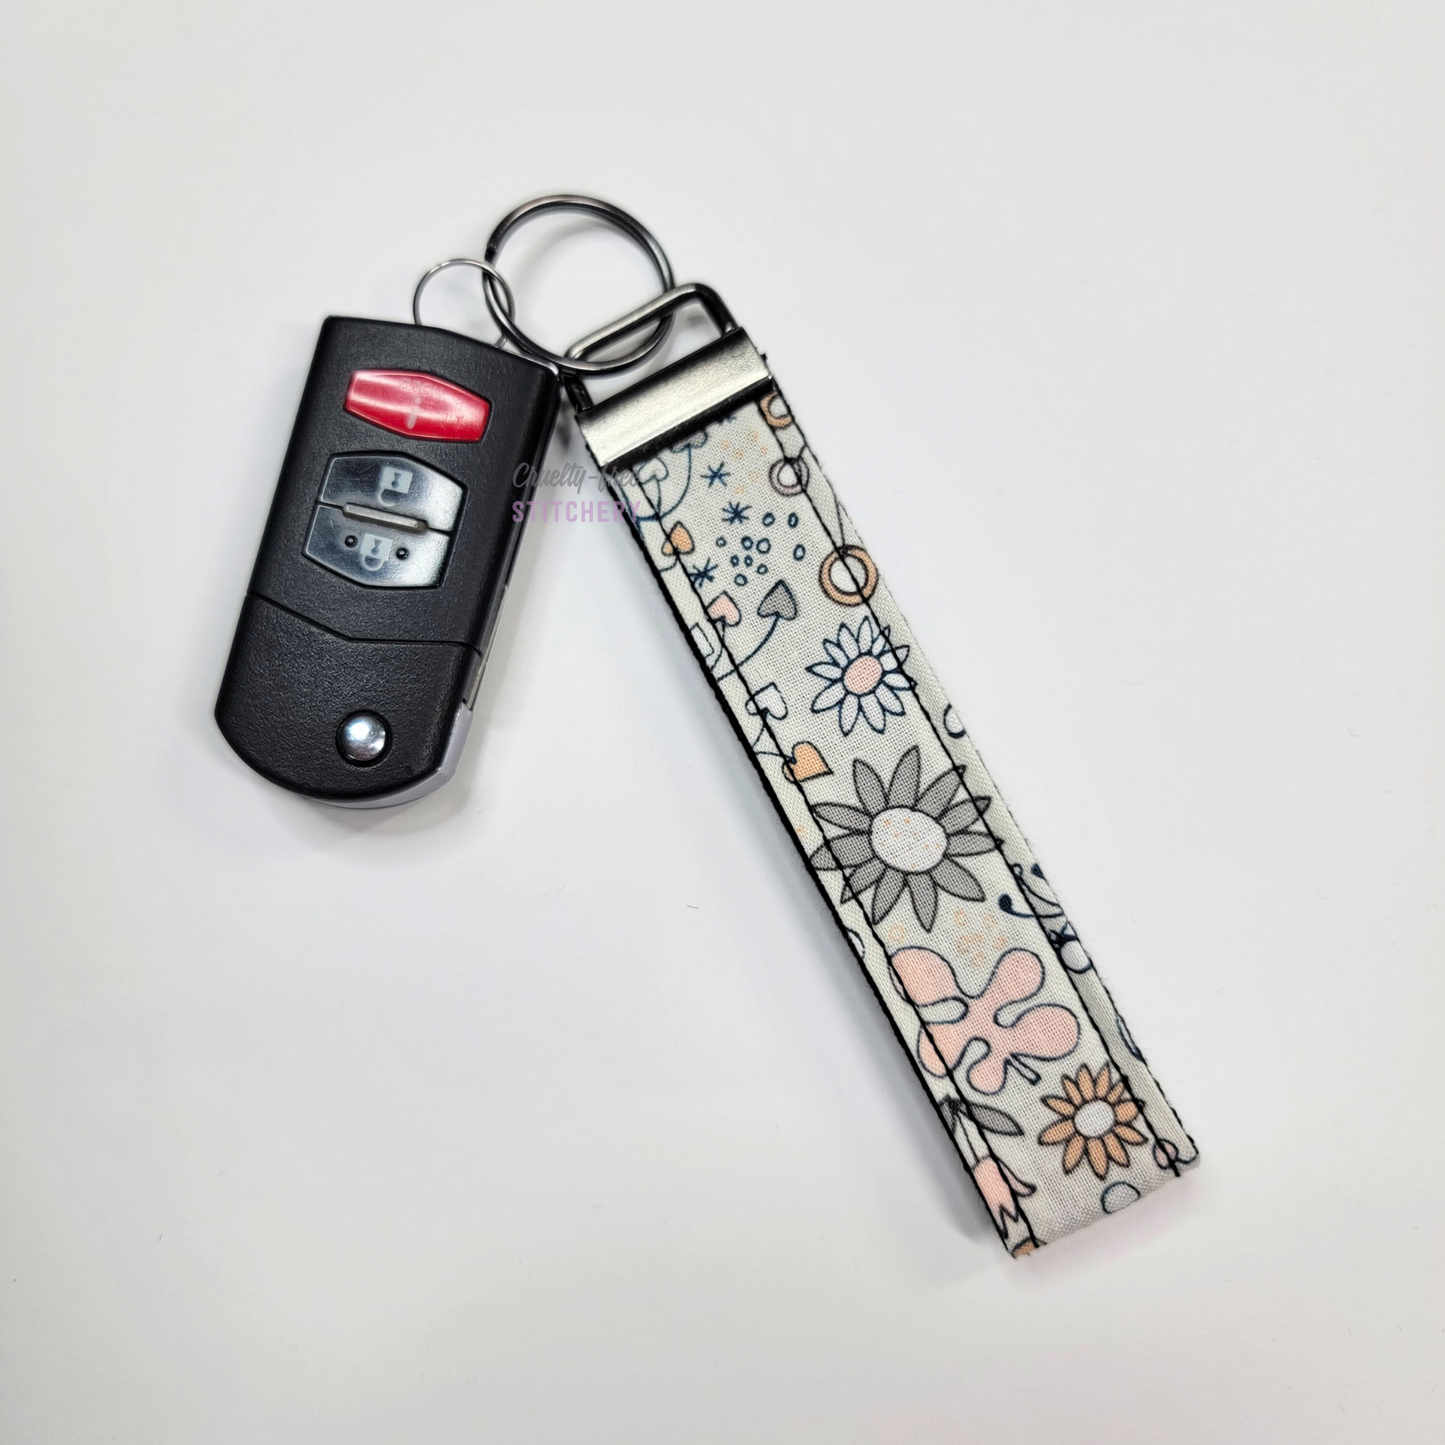 Grey and pink flowers print key fob wristlet attached to a car key for scale. The car key is the fold-away type and is about half as long as the strap.